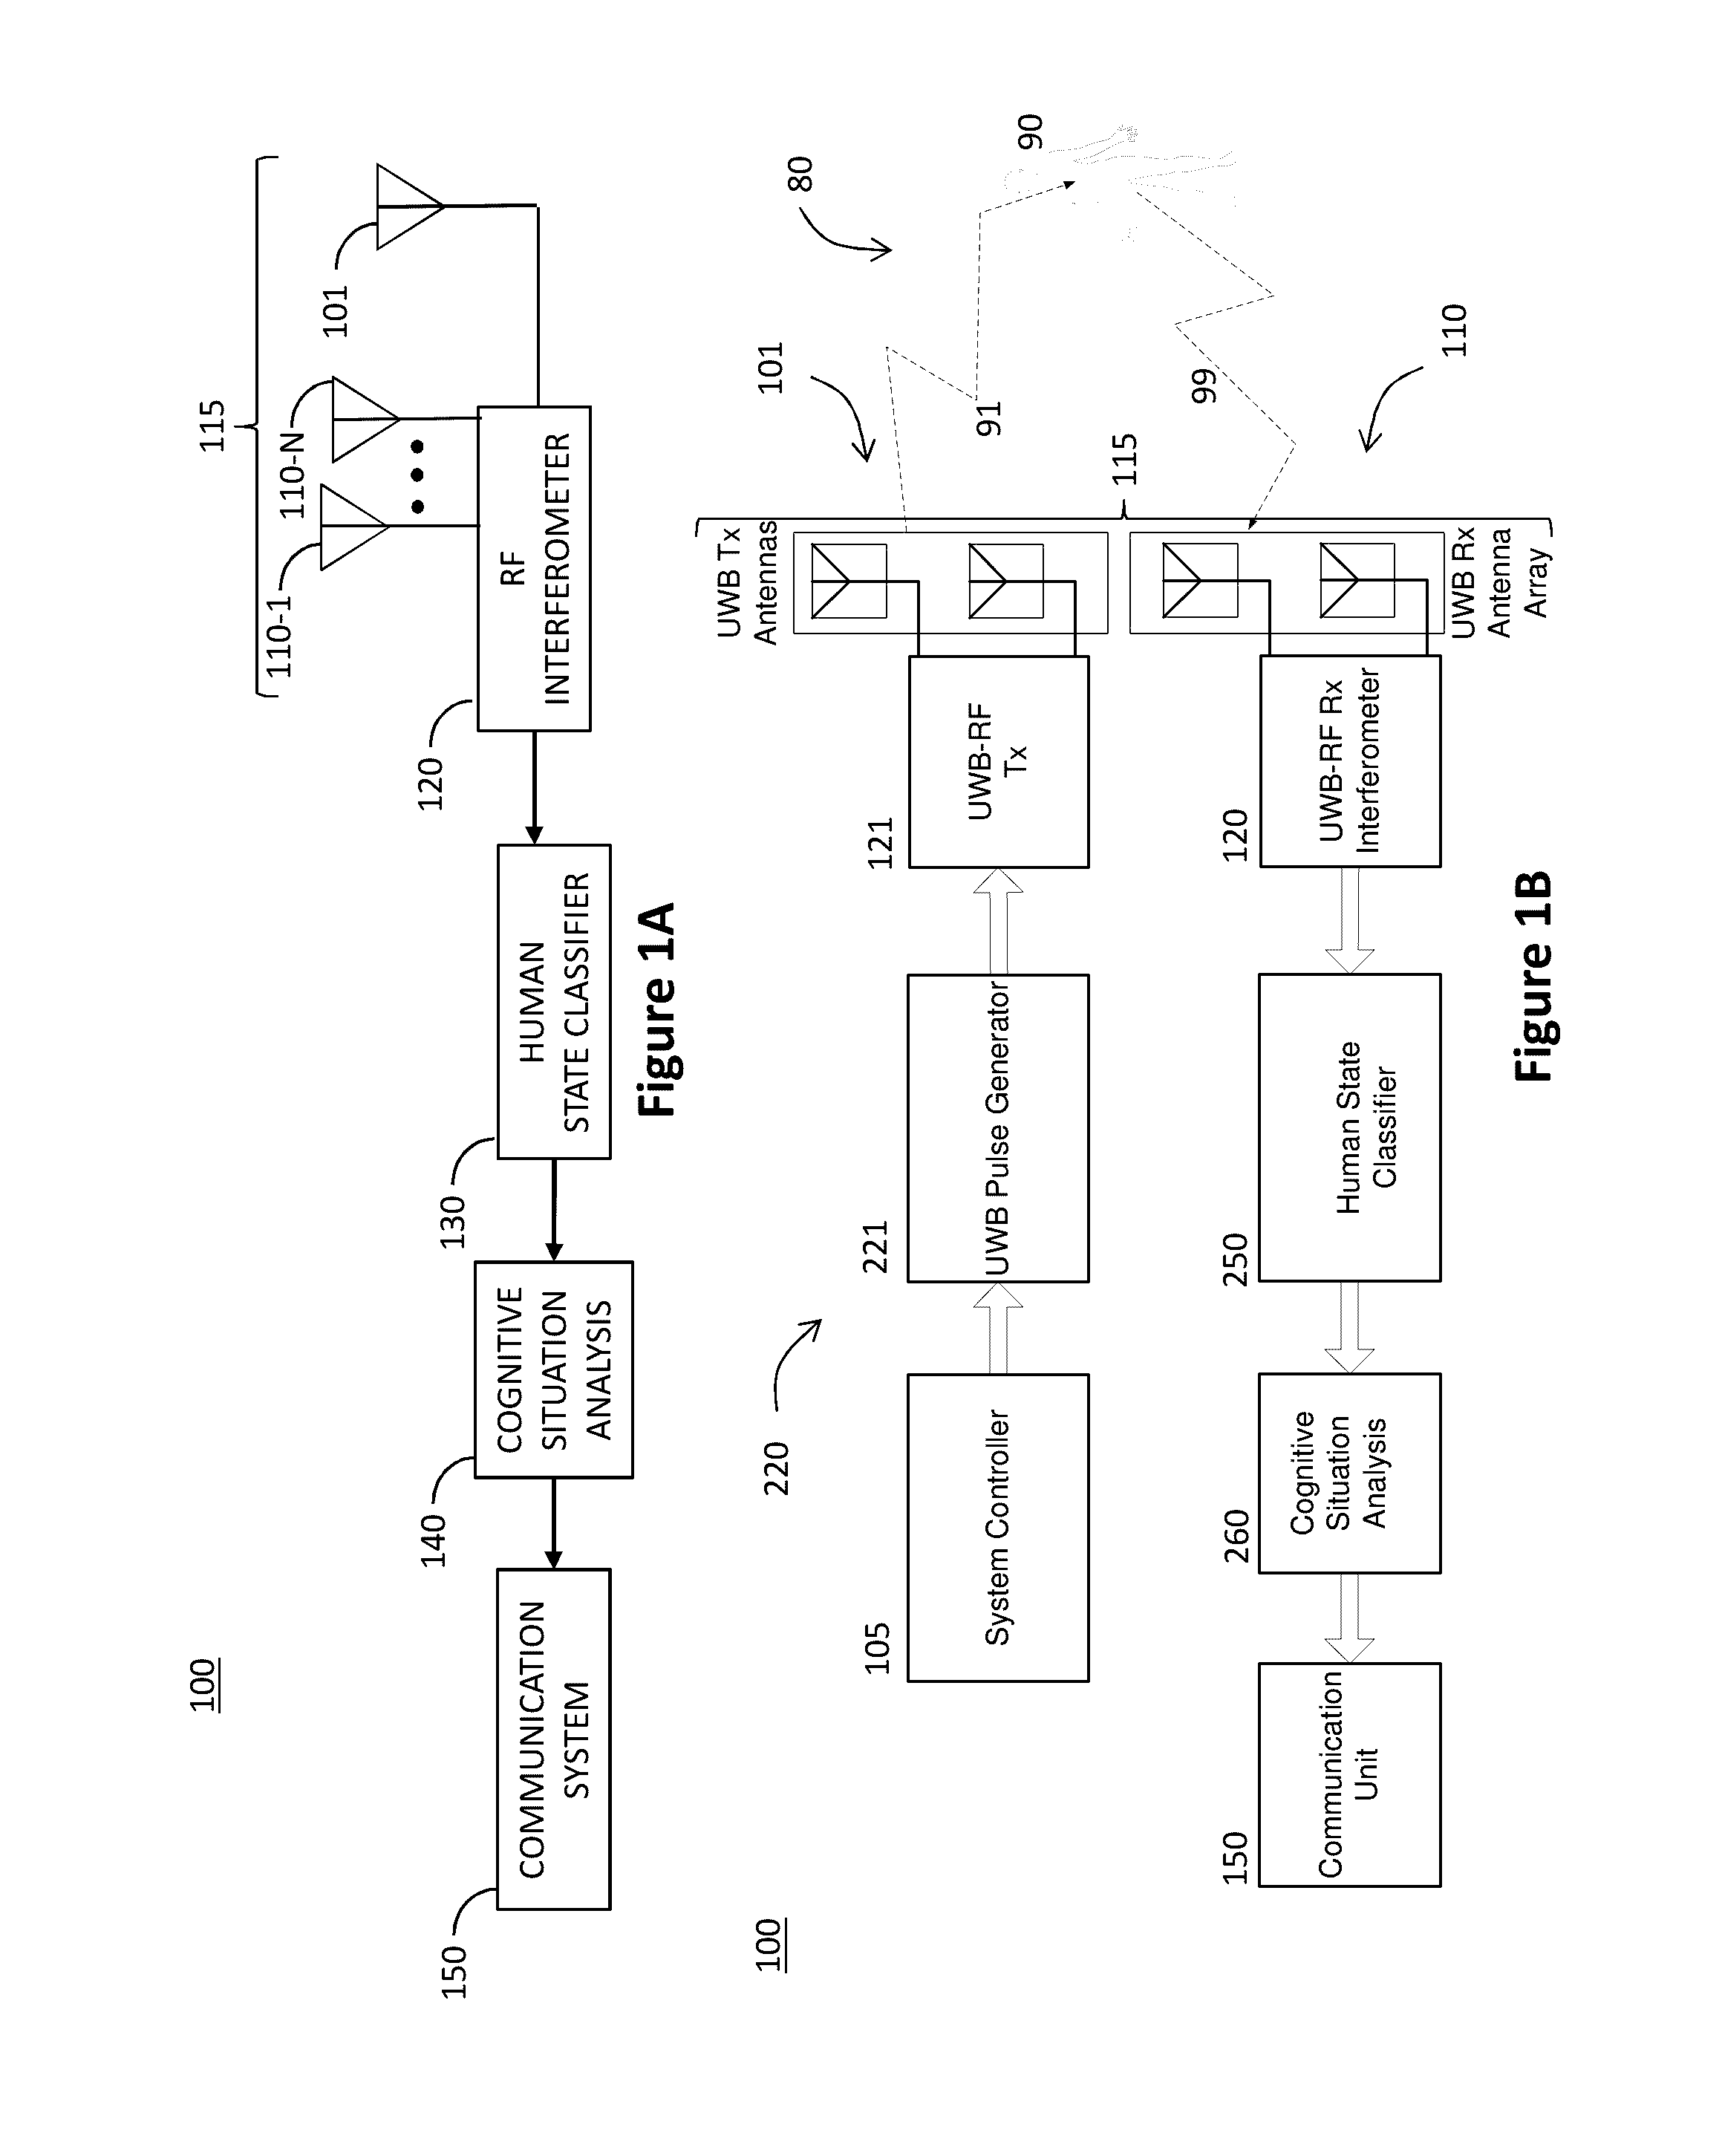 Human respiration feature extraction in personal emergency response systems and methods